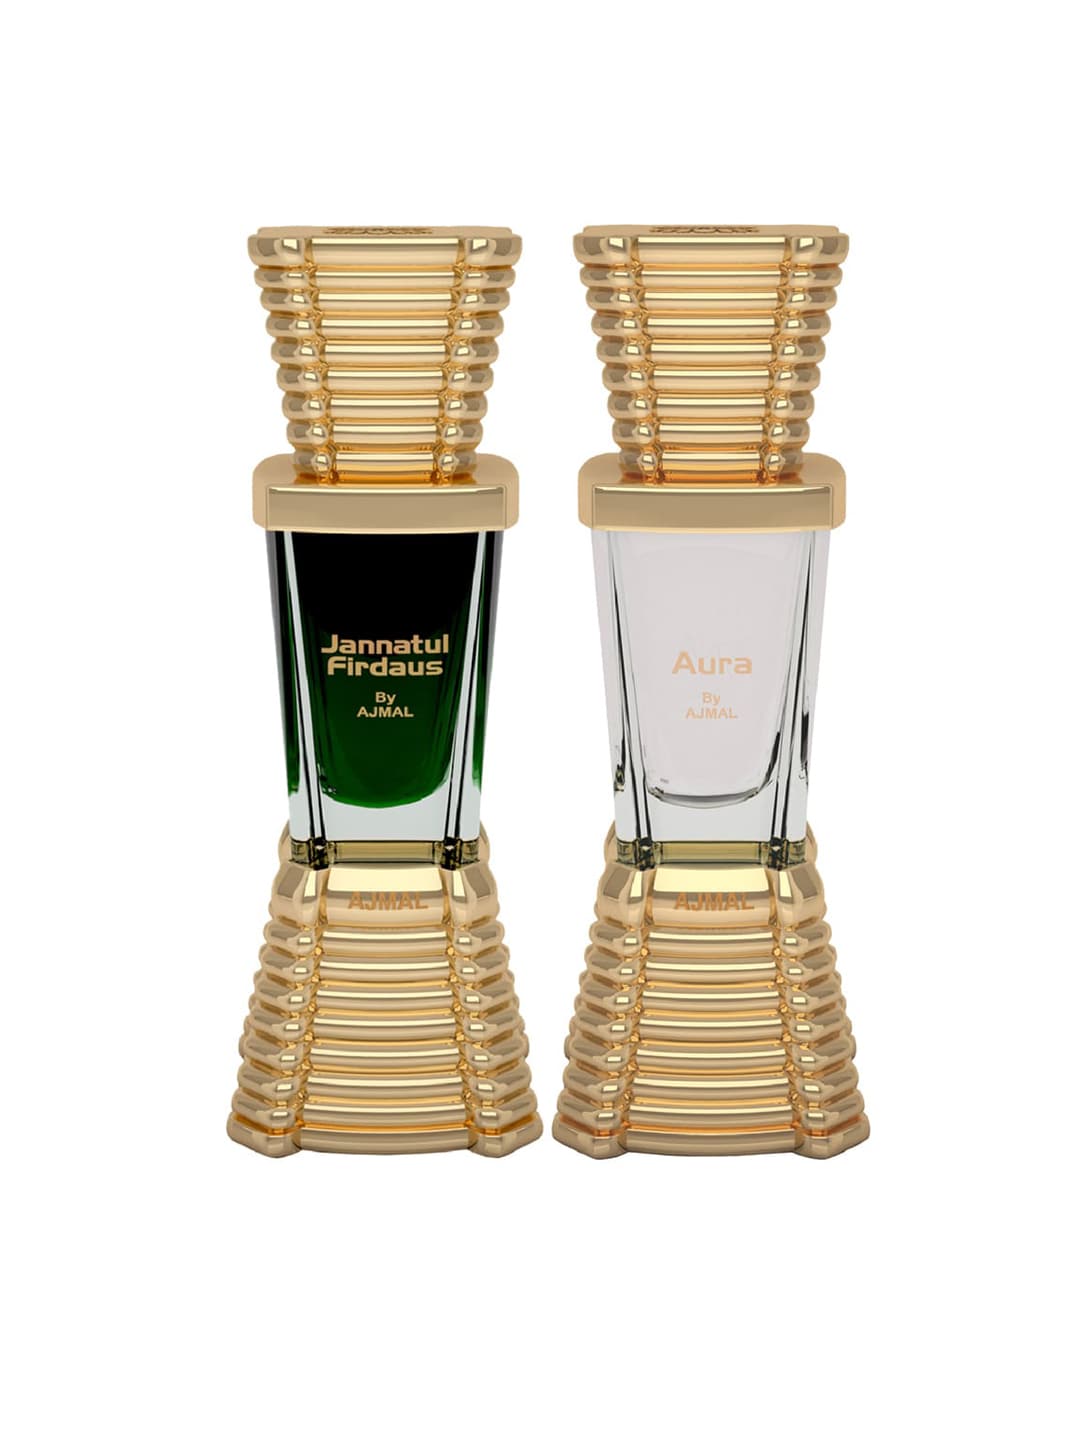 Ajmal Set of 2 Concentrated Perfumes - Jannatul Firdaus & Aura - 10ml each Price in India